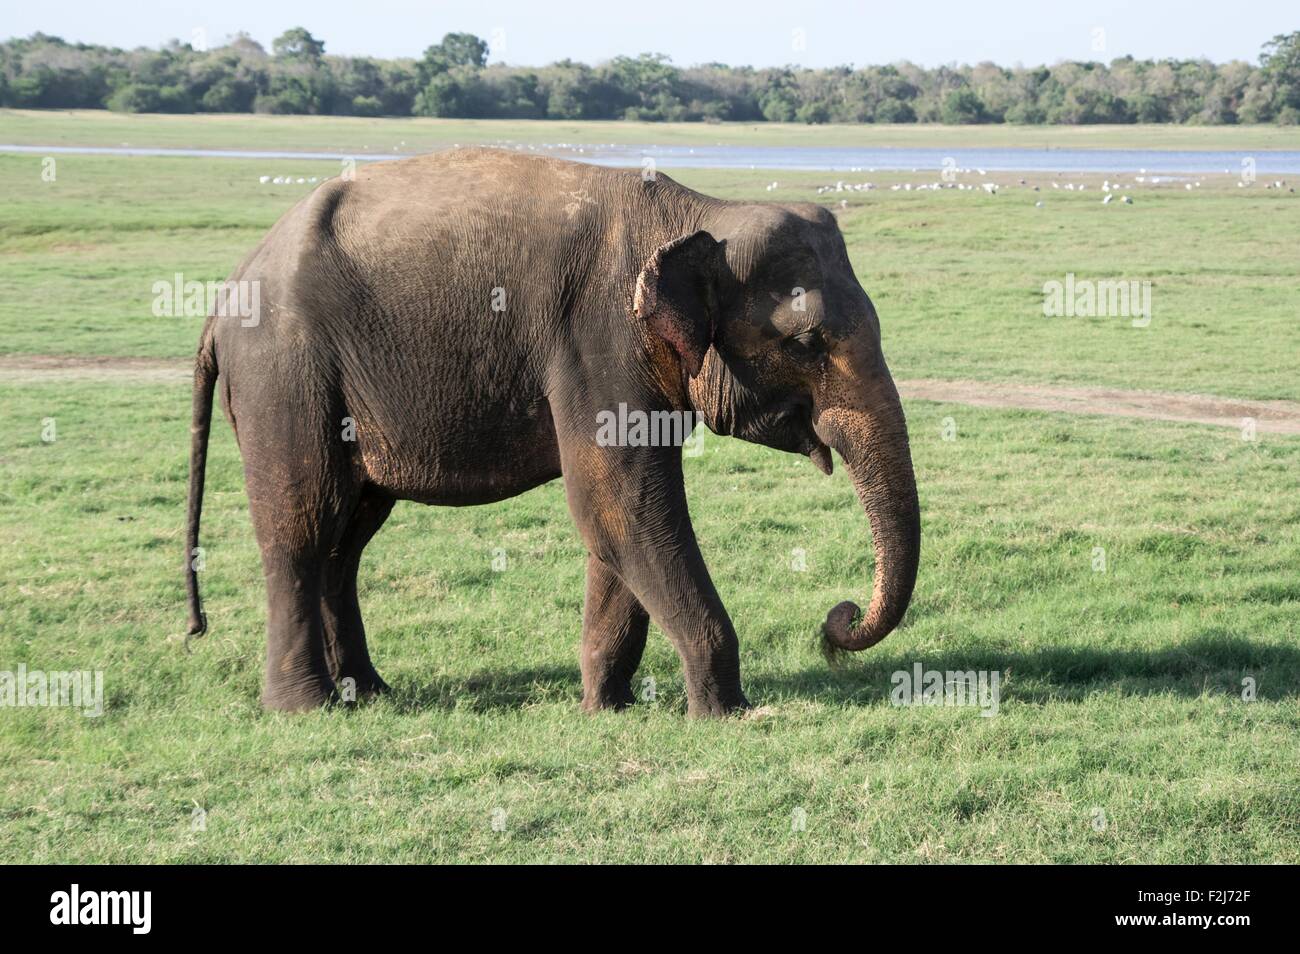 A wild elephant in Sri Lanka in Kaudulla National Park in front of a lake Stock Photo